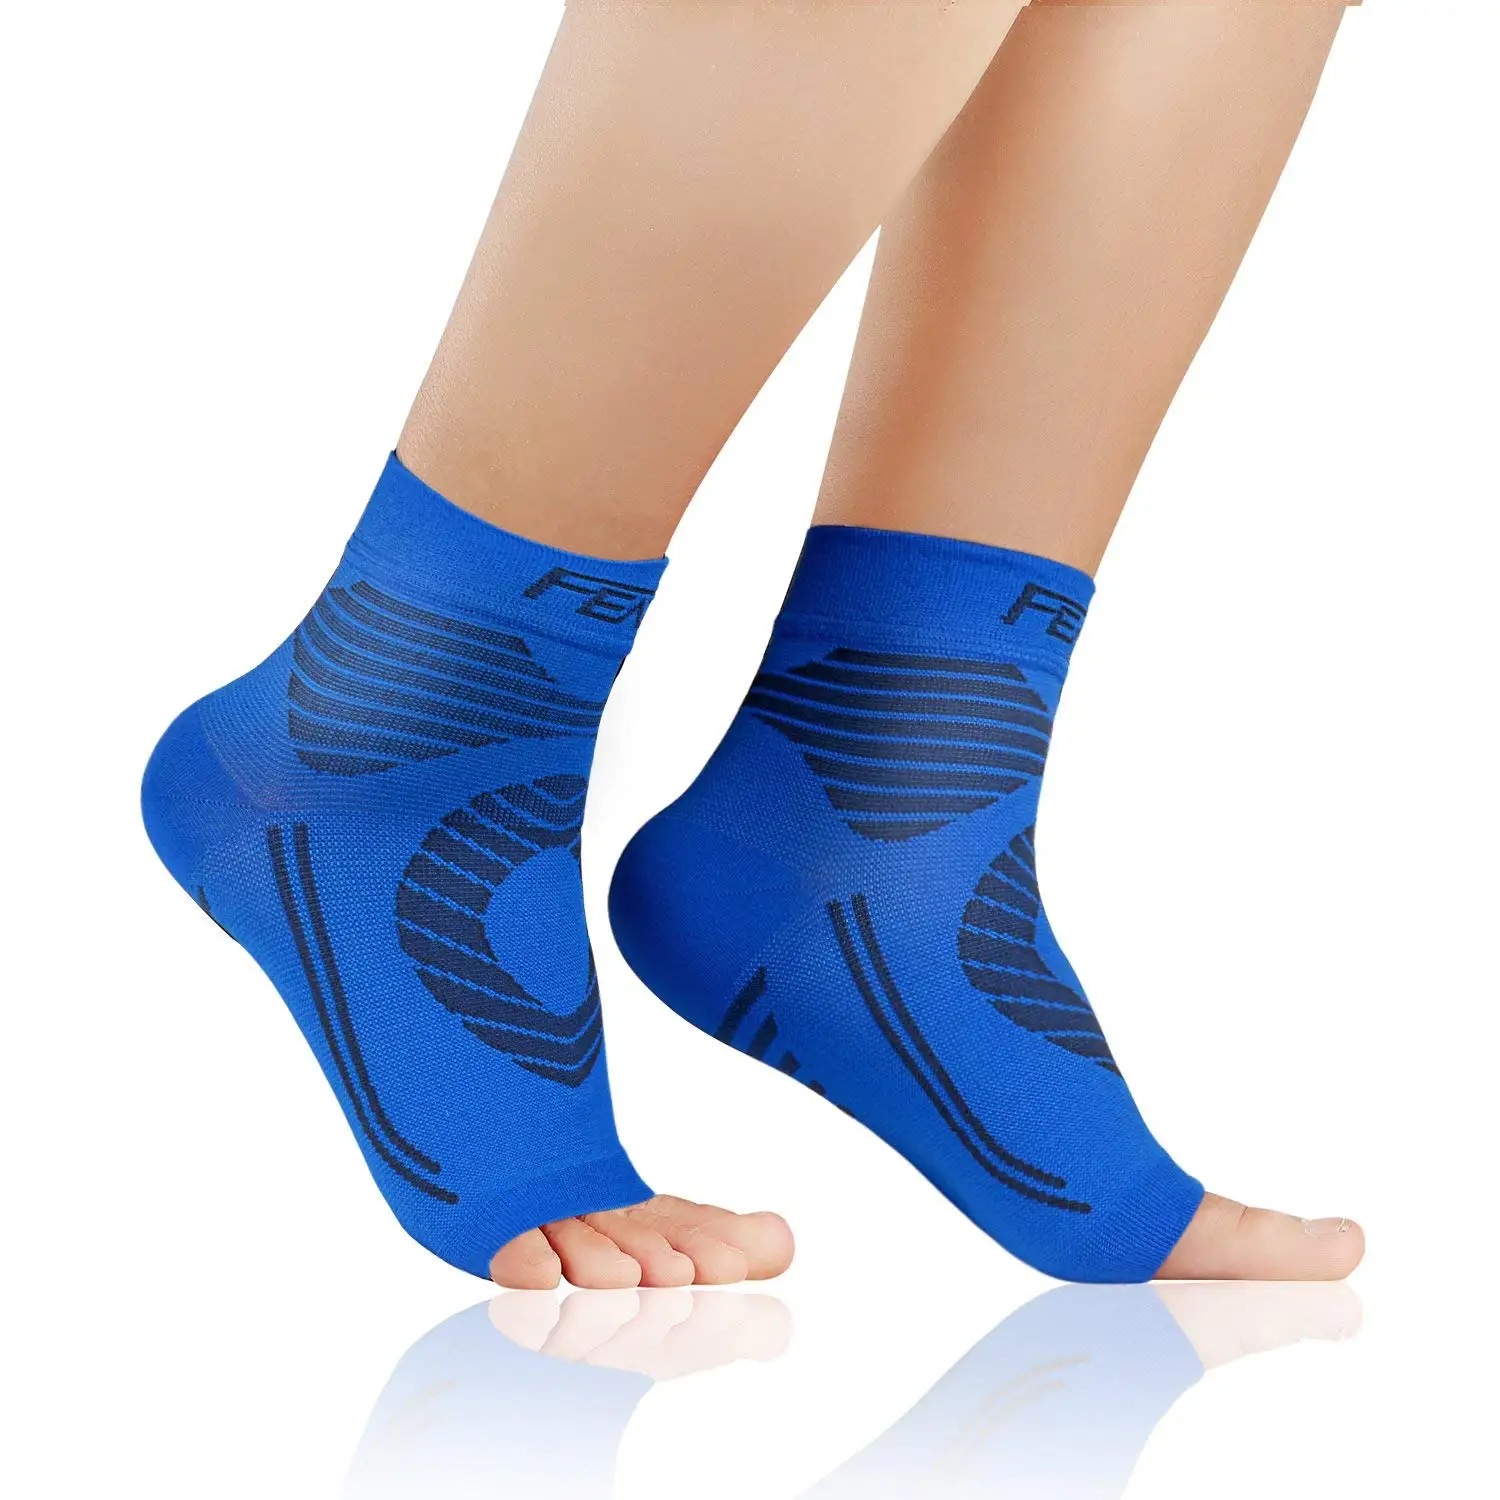 socks to relieve foot pain